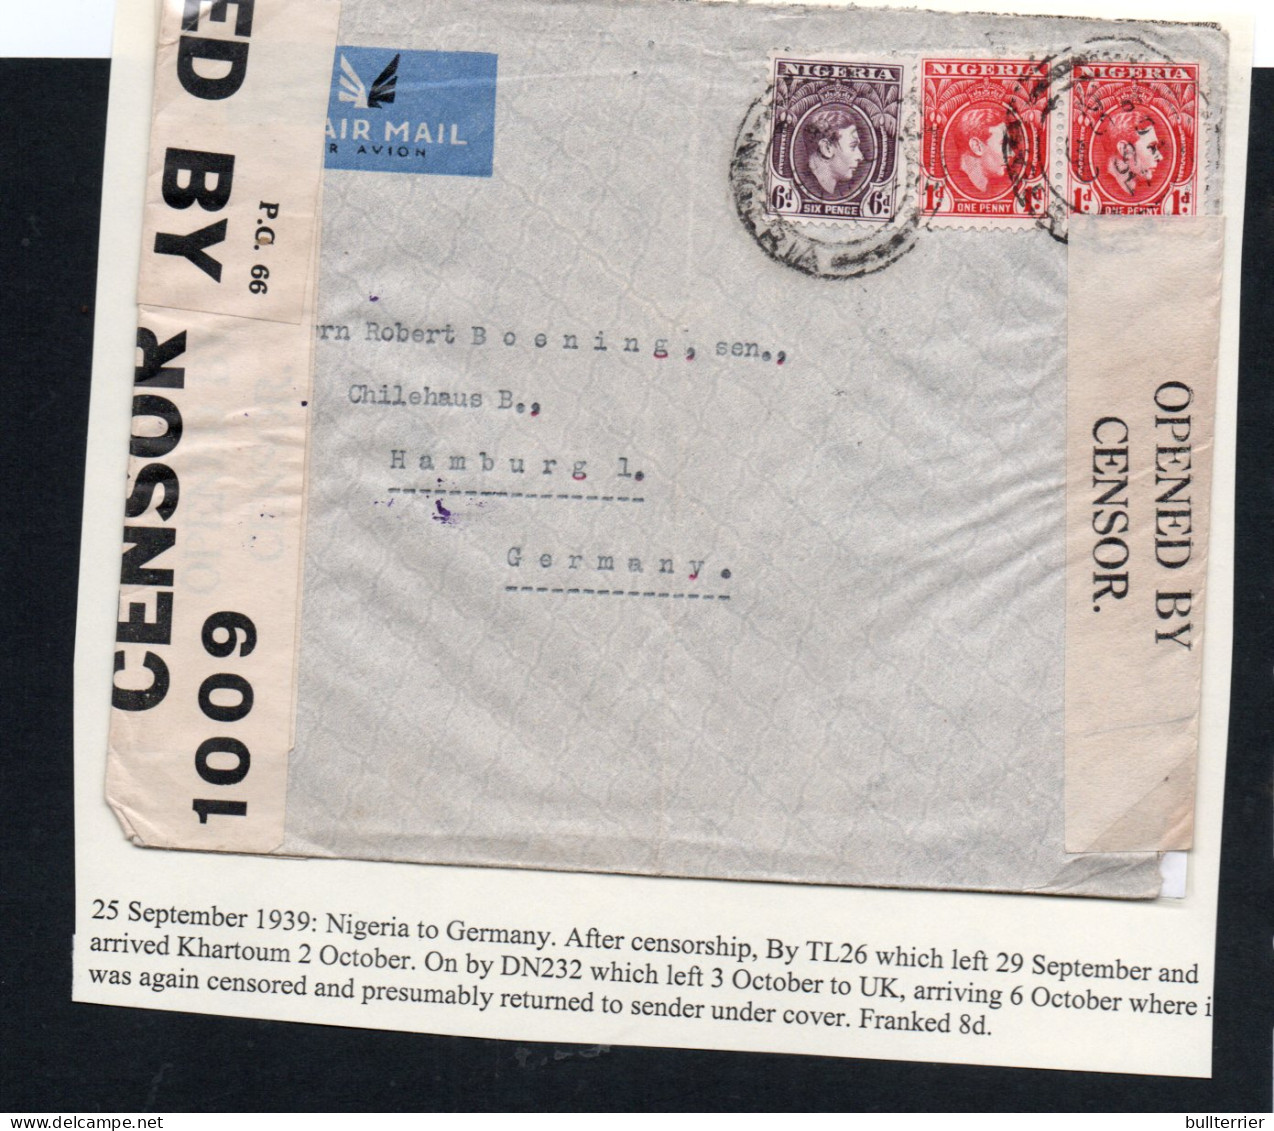 NIGERIA - 1939 - CENSORED  AIRMAIL COVER TO GERMANY  - Nigeria (...-1960)